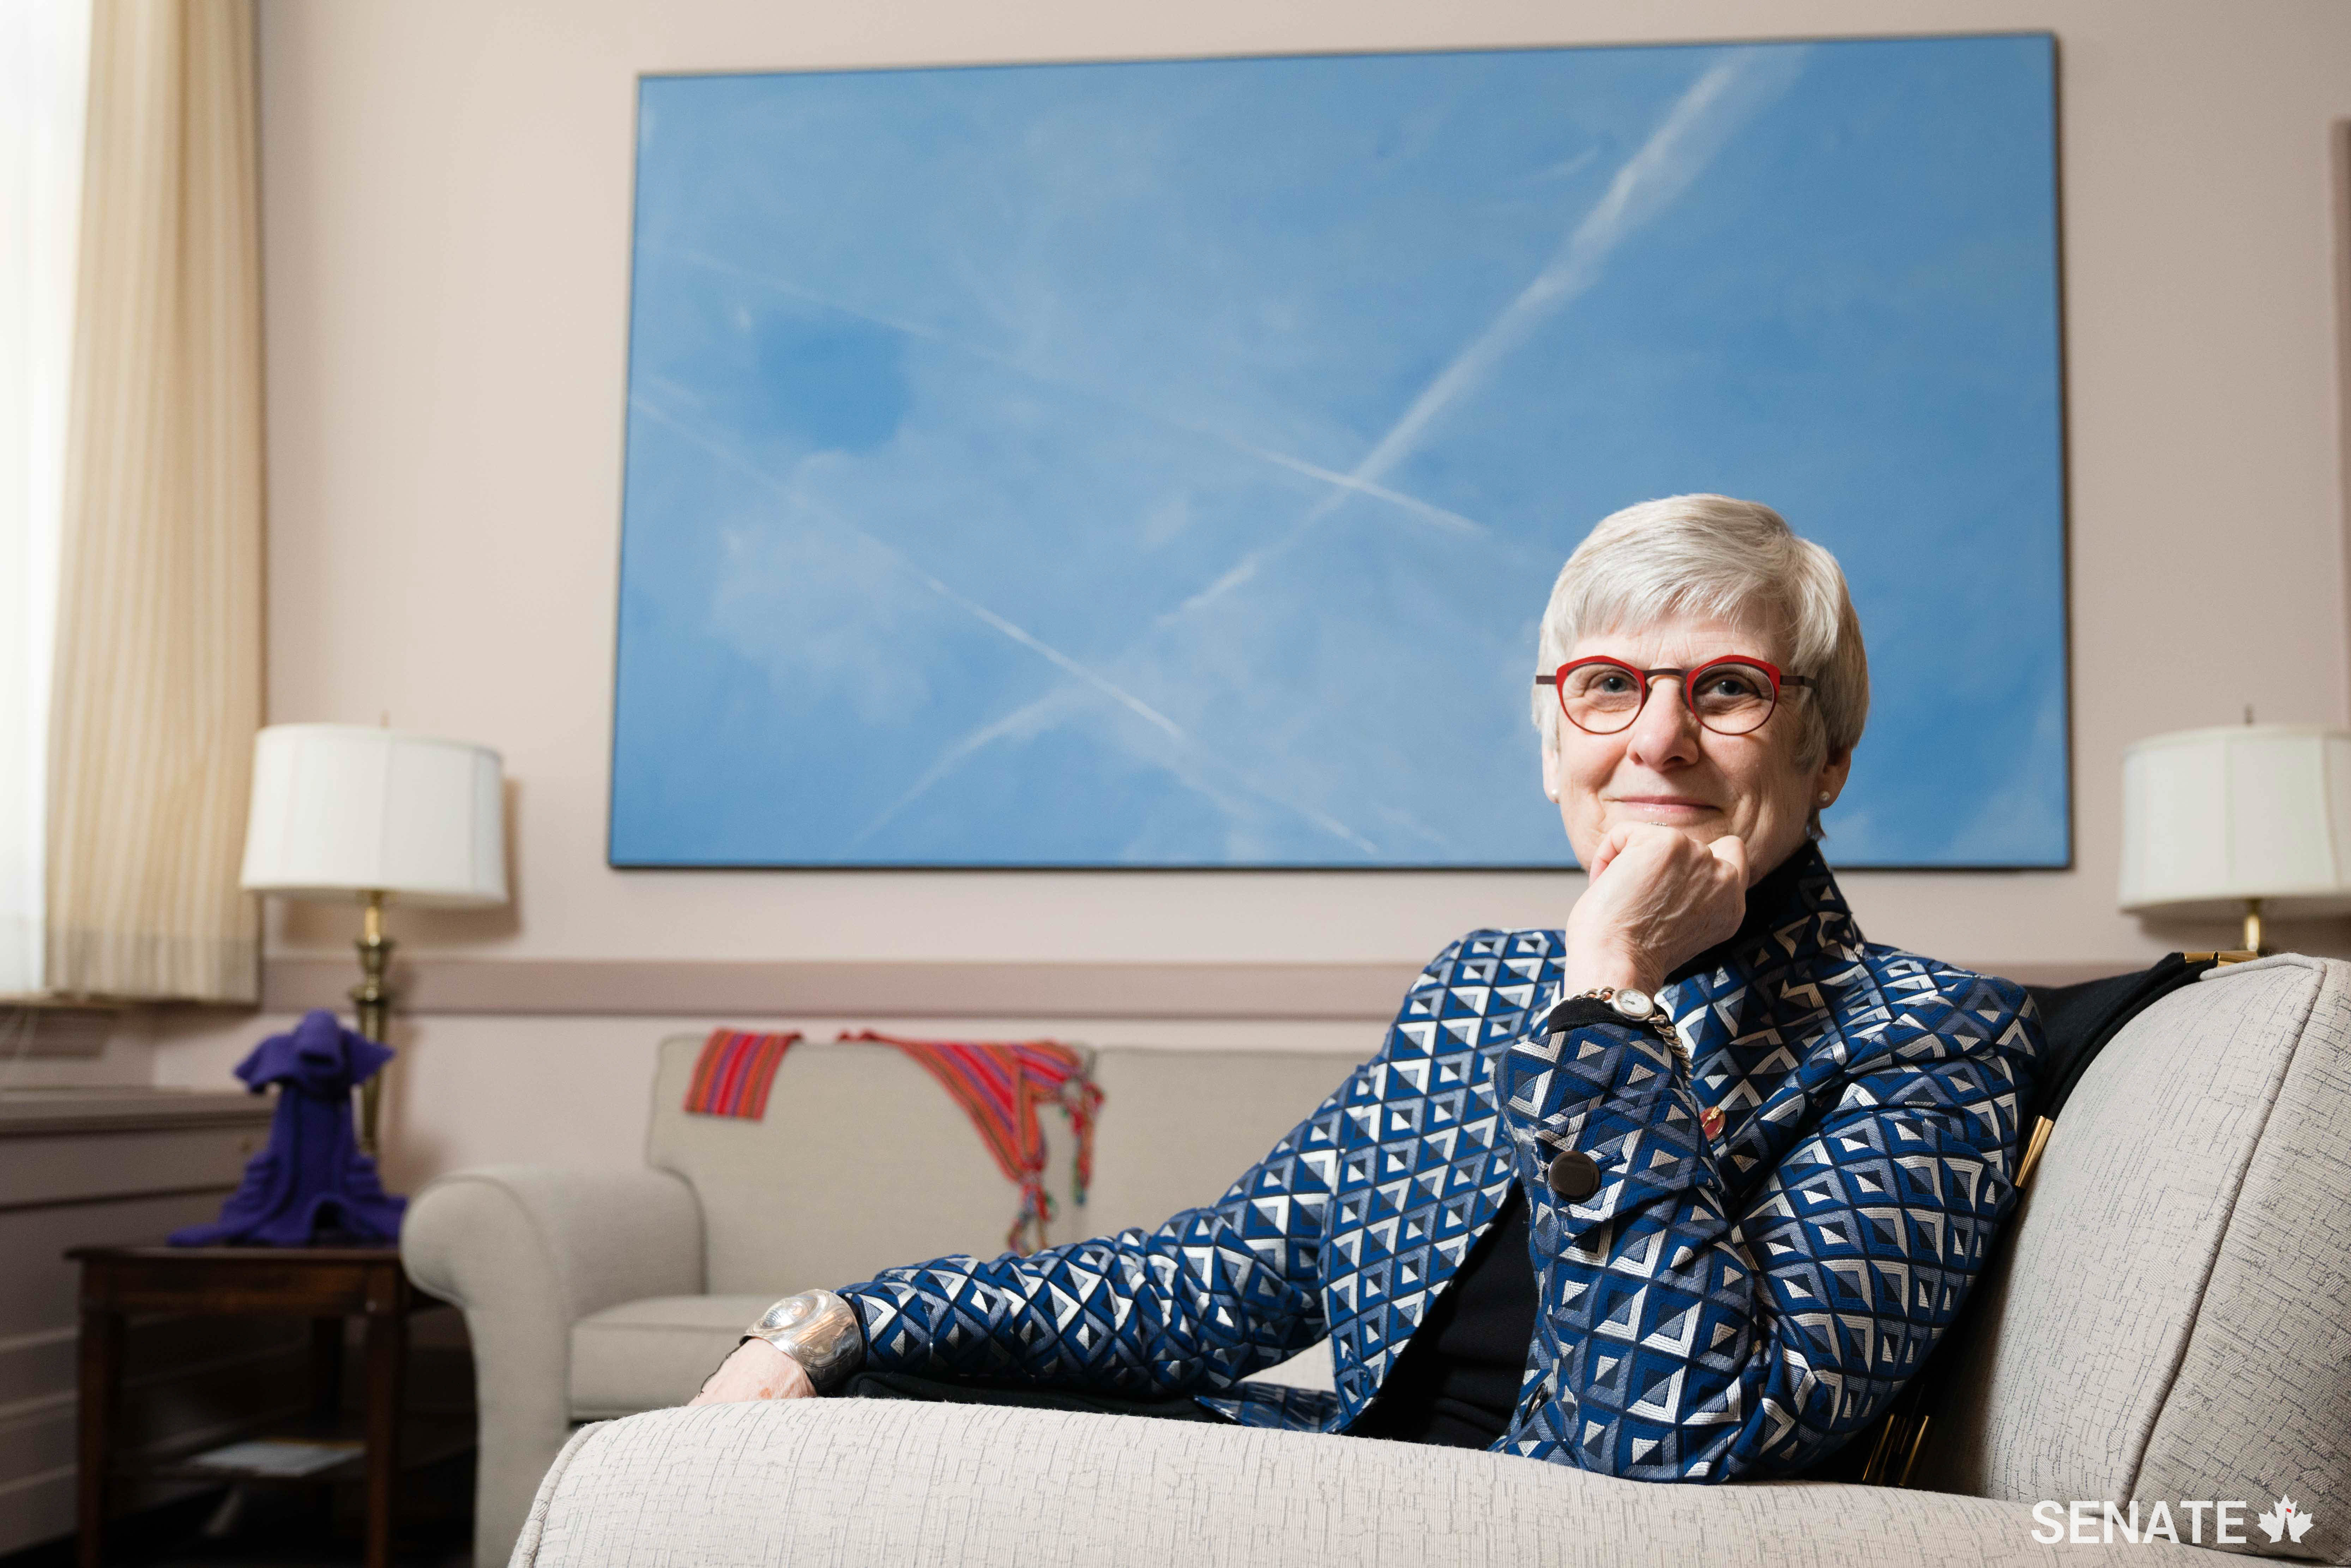 Senator Patricia Bovey’s East Block office features a work by Manitoba painter Roger Lafrenière, "The Zone," a 1.5 x 3-metre canvas depicting a vast contrail-streaked Prairie sky.